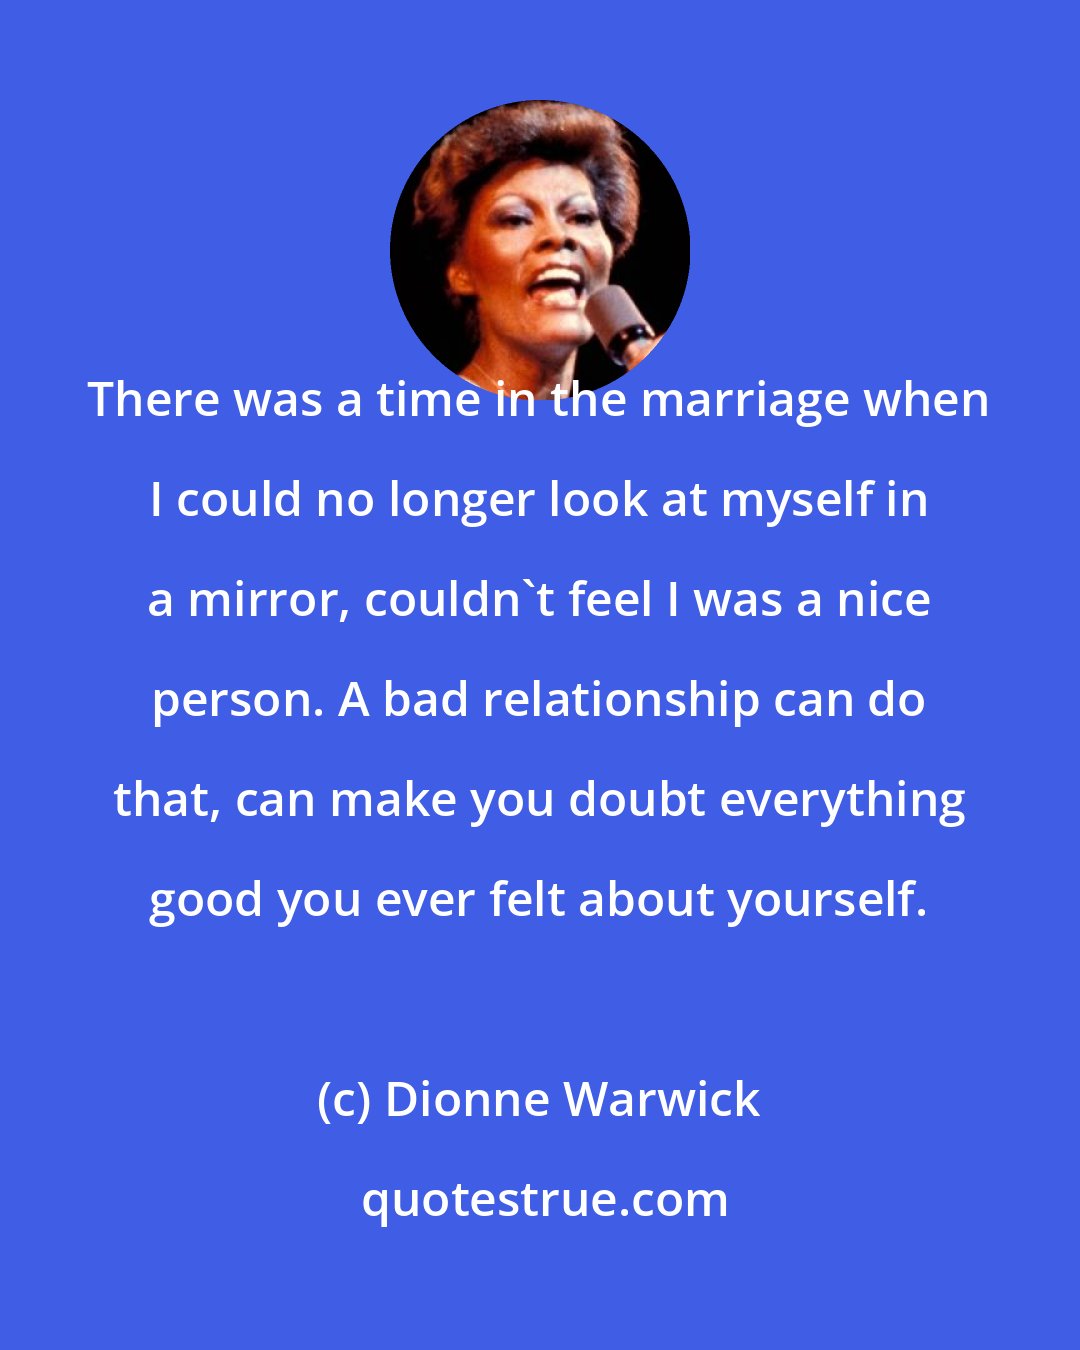 Dionne Warwick: There was a time in the marriage when I could no longer look at myself in a mirror, couldn't feel I was a nice person. A bad relationship can do that, can make you doubt everything good you ever felt about yourself.